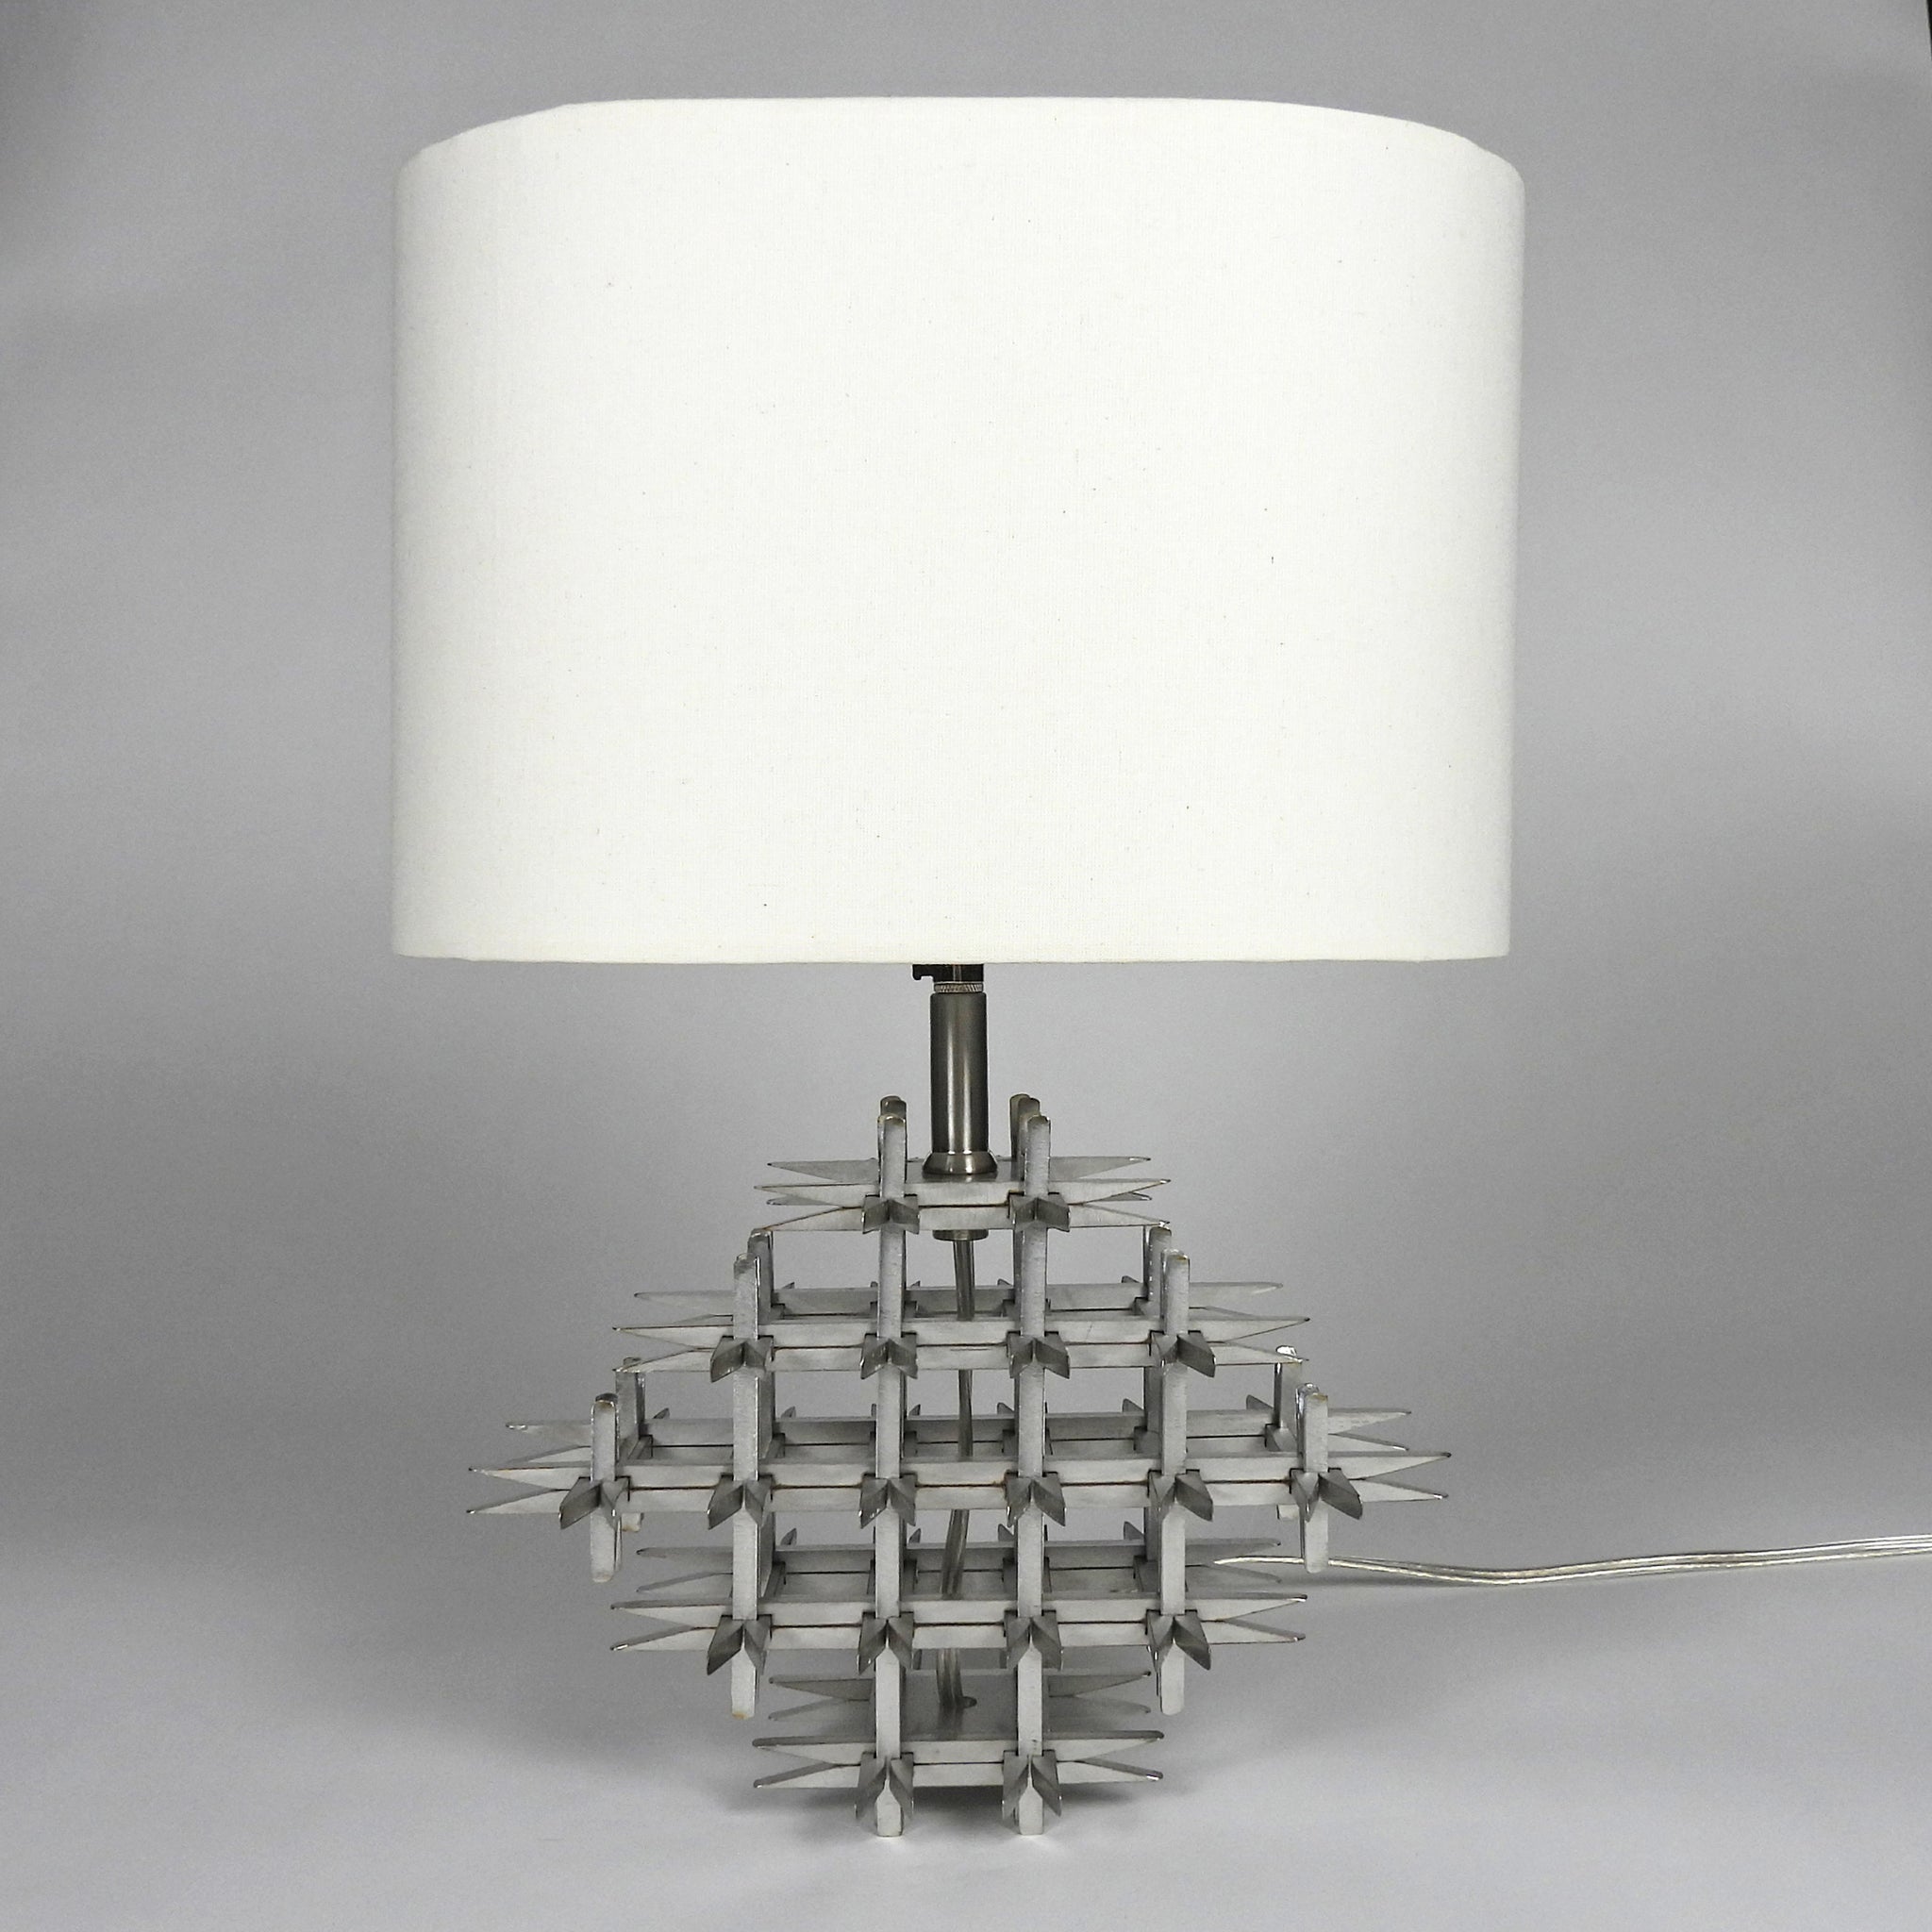 Crown of Thorns Lamp - White Shade